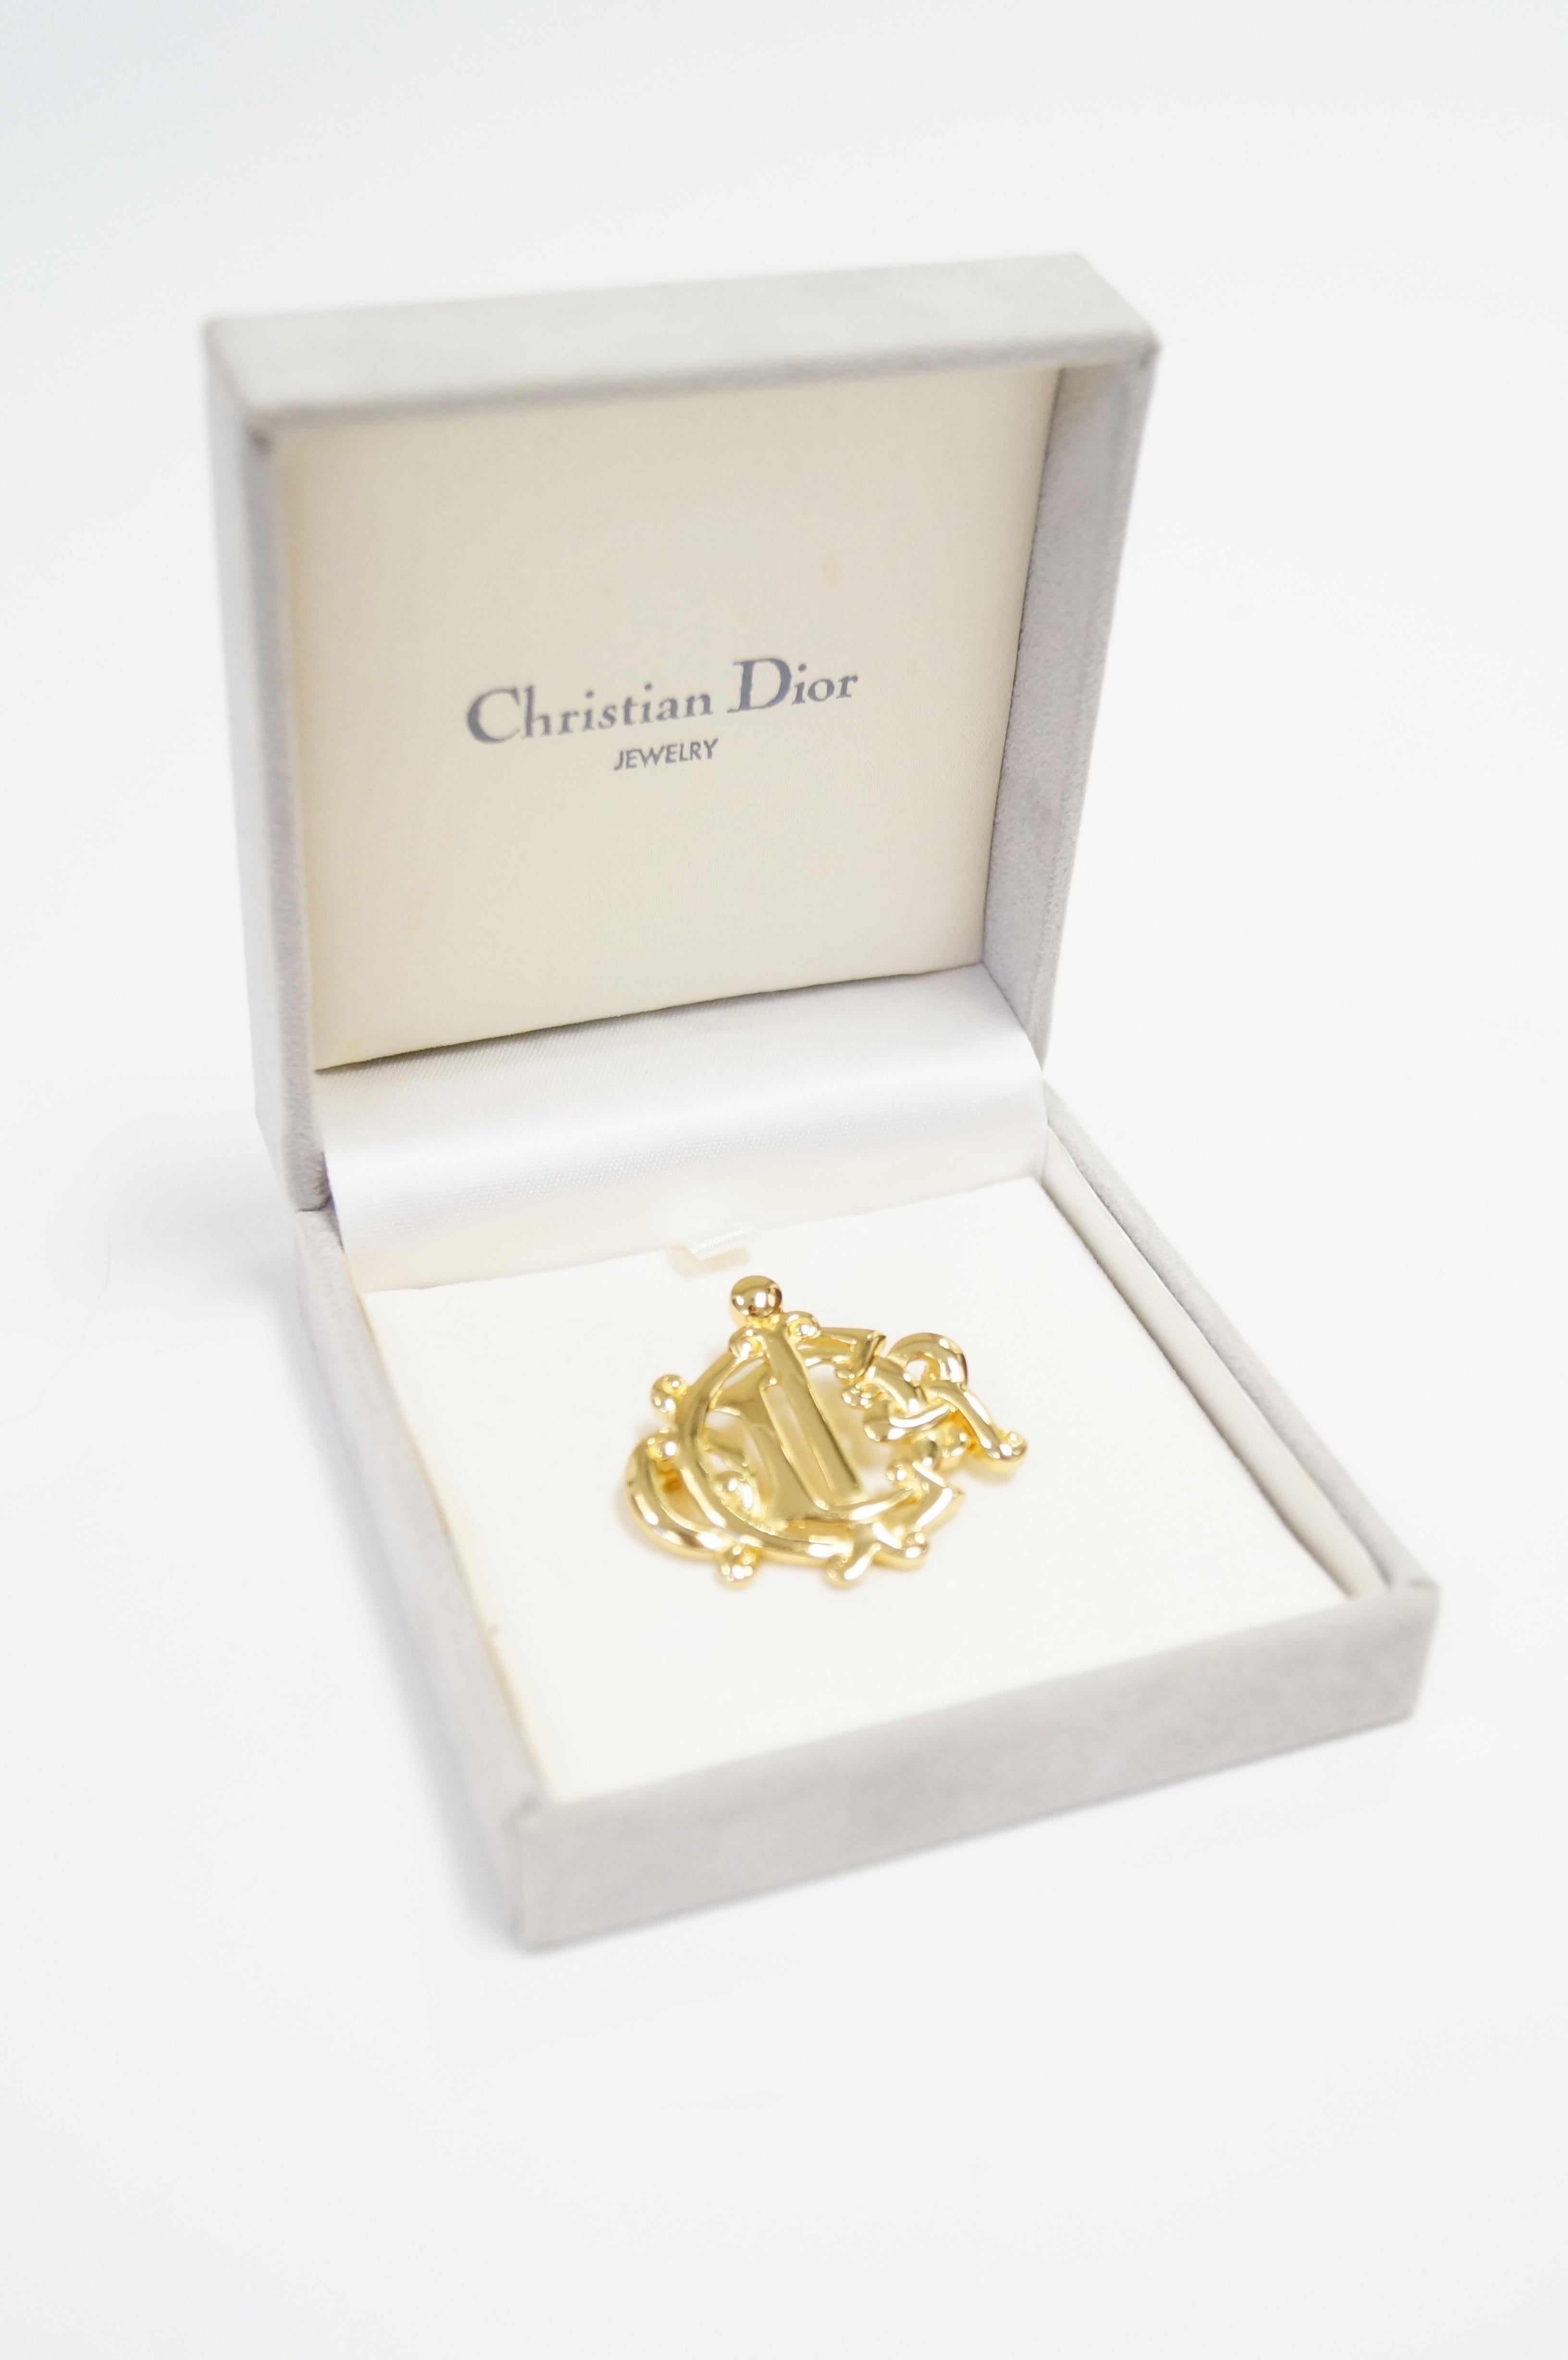 Amazing vintage Christian Dior initial brooch. The vermeil brooch features the elegantly intertwined 